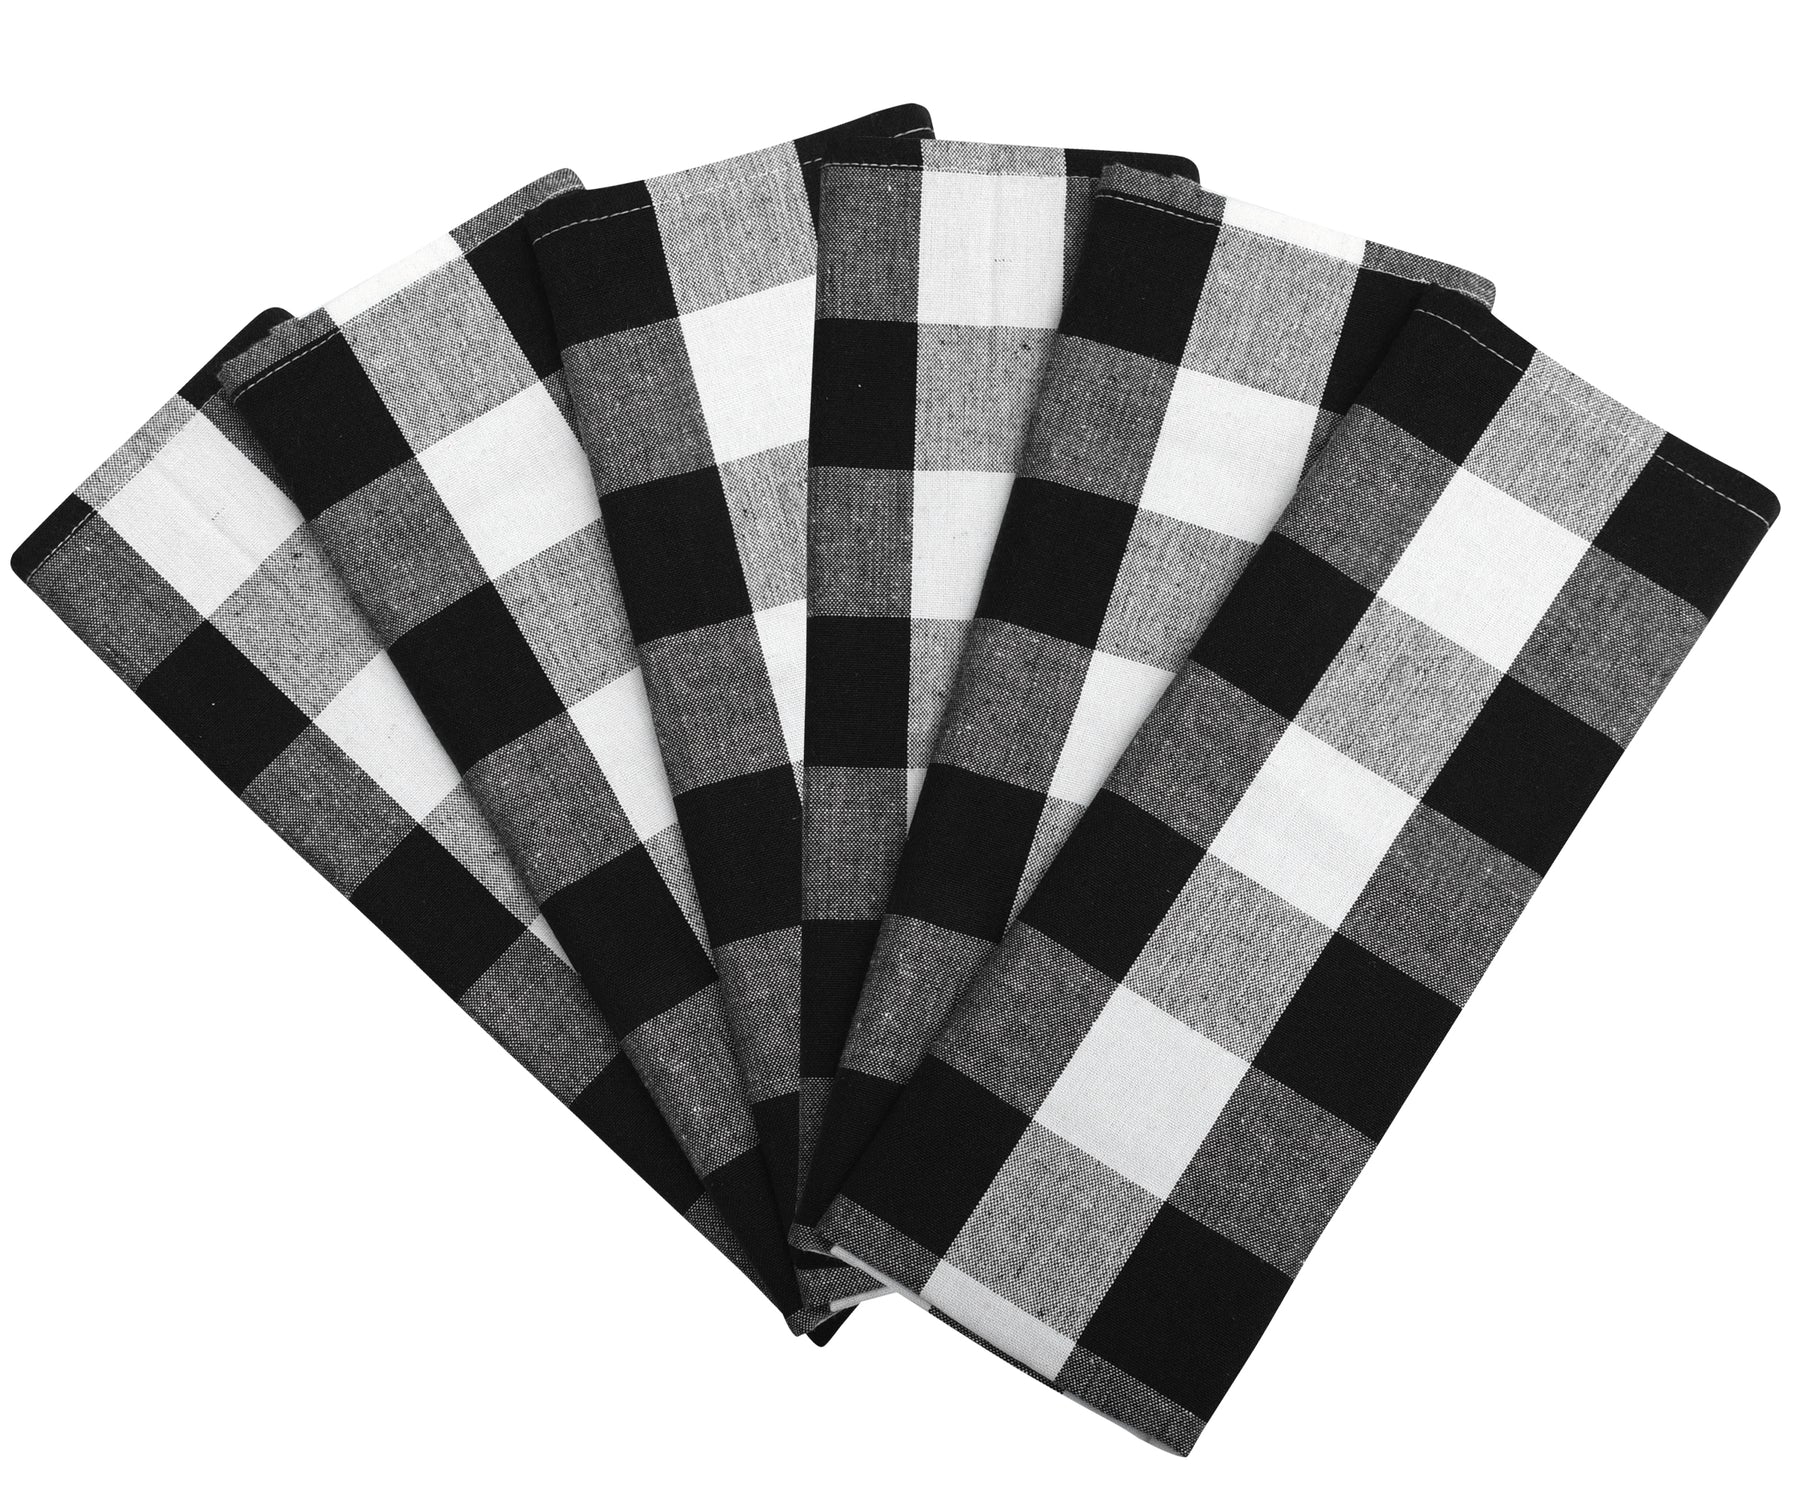 These black and white striped dish towels are made from a soft and absorbent cotton blend, and their fun pattern will add a touch of color to your kitchen.